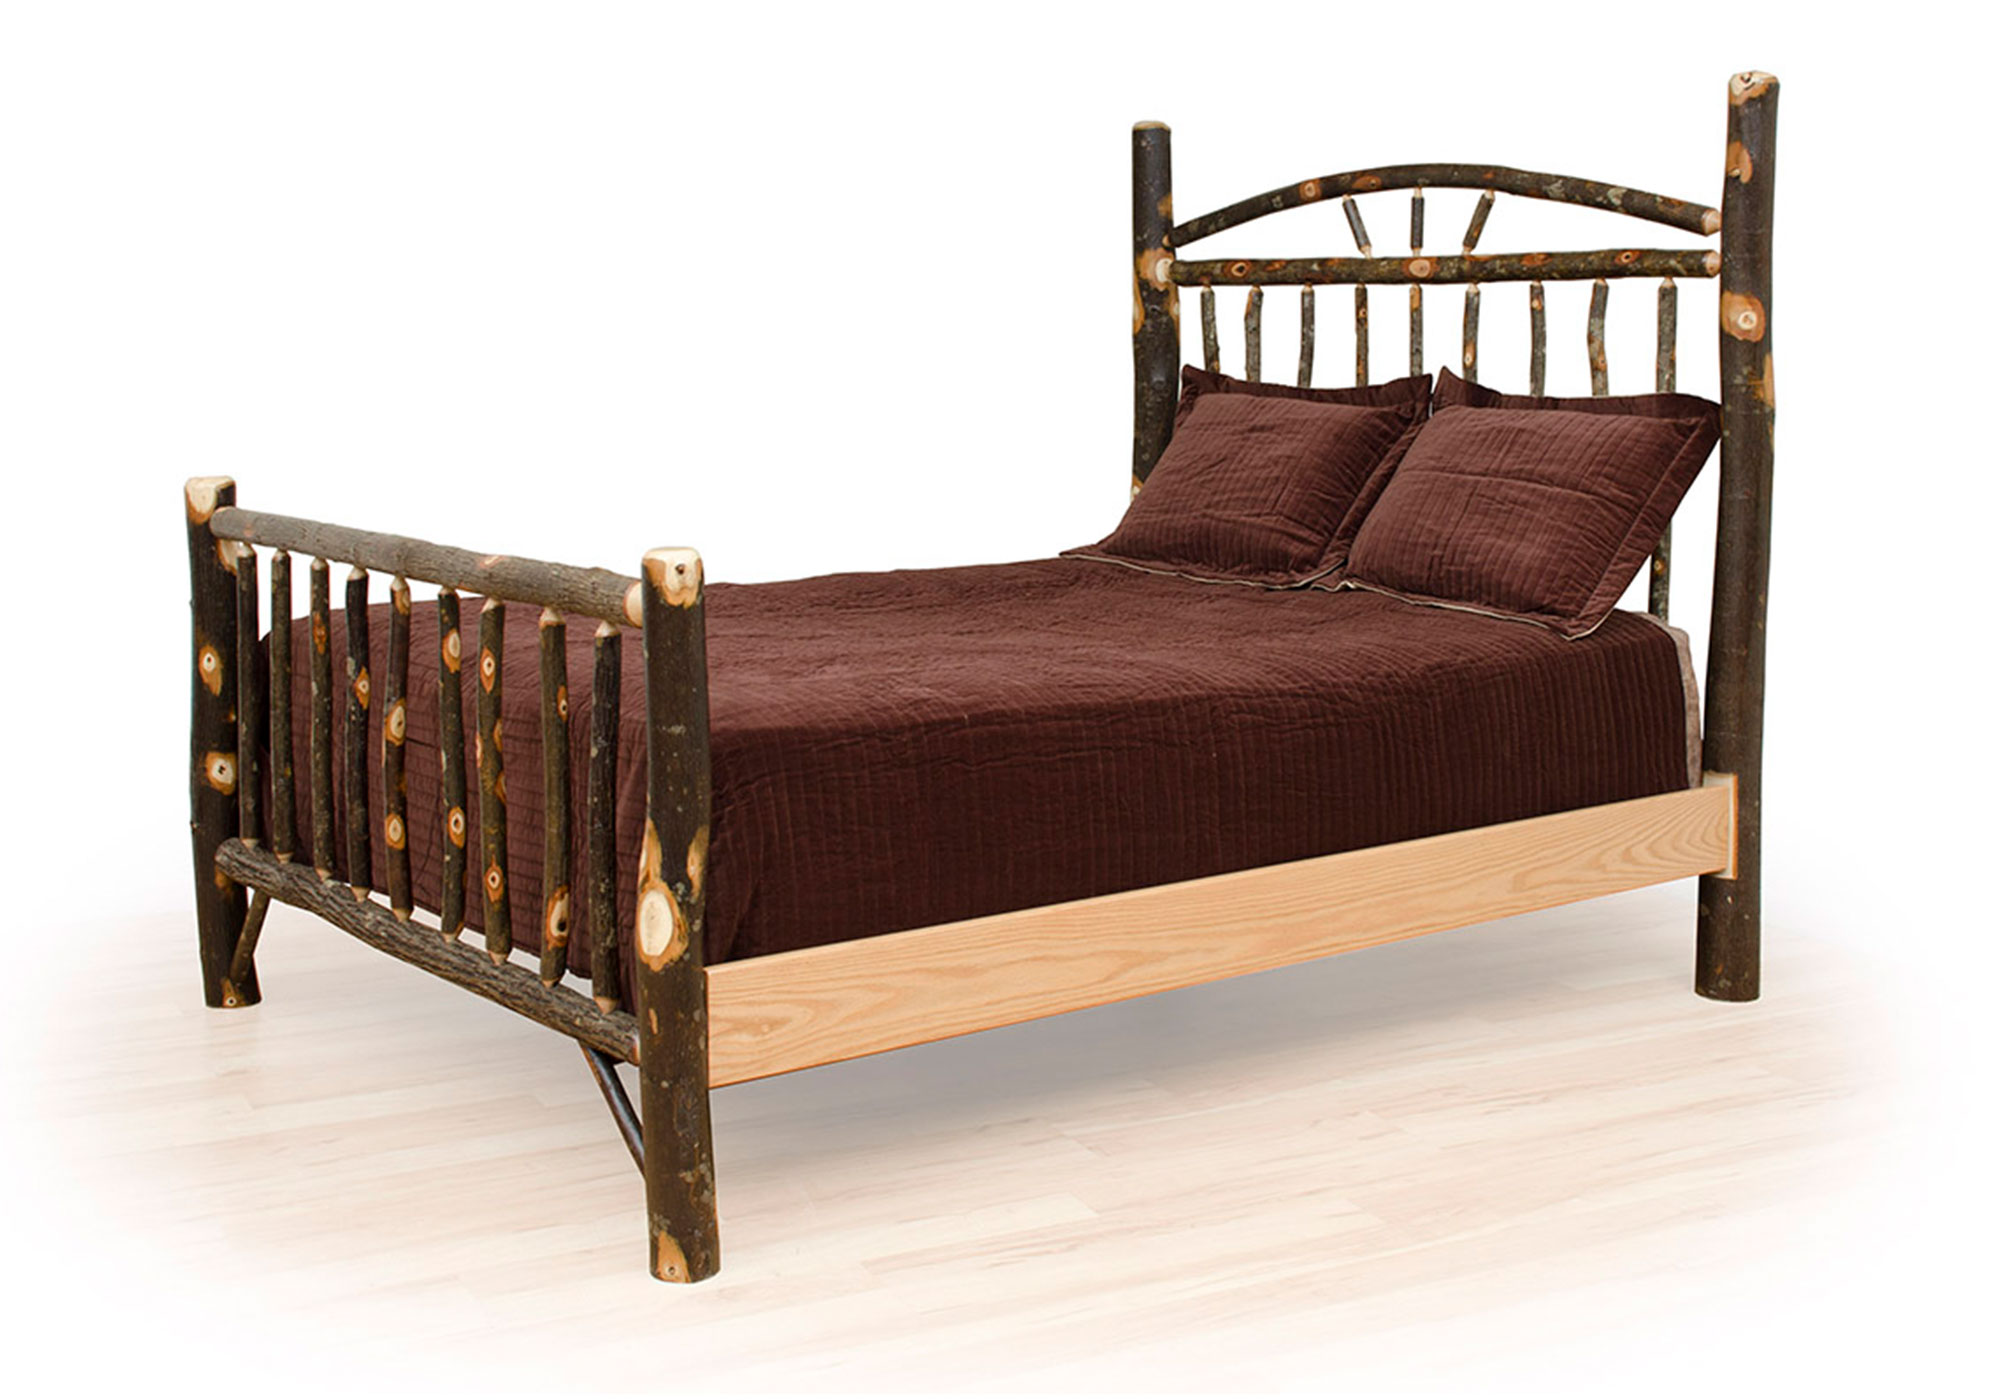 Hickory Wagon Wheel Bed For, Wagon Wheel Bed Frame